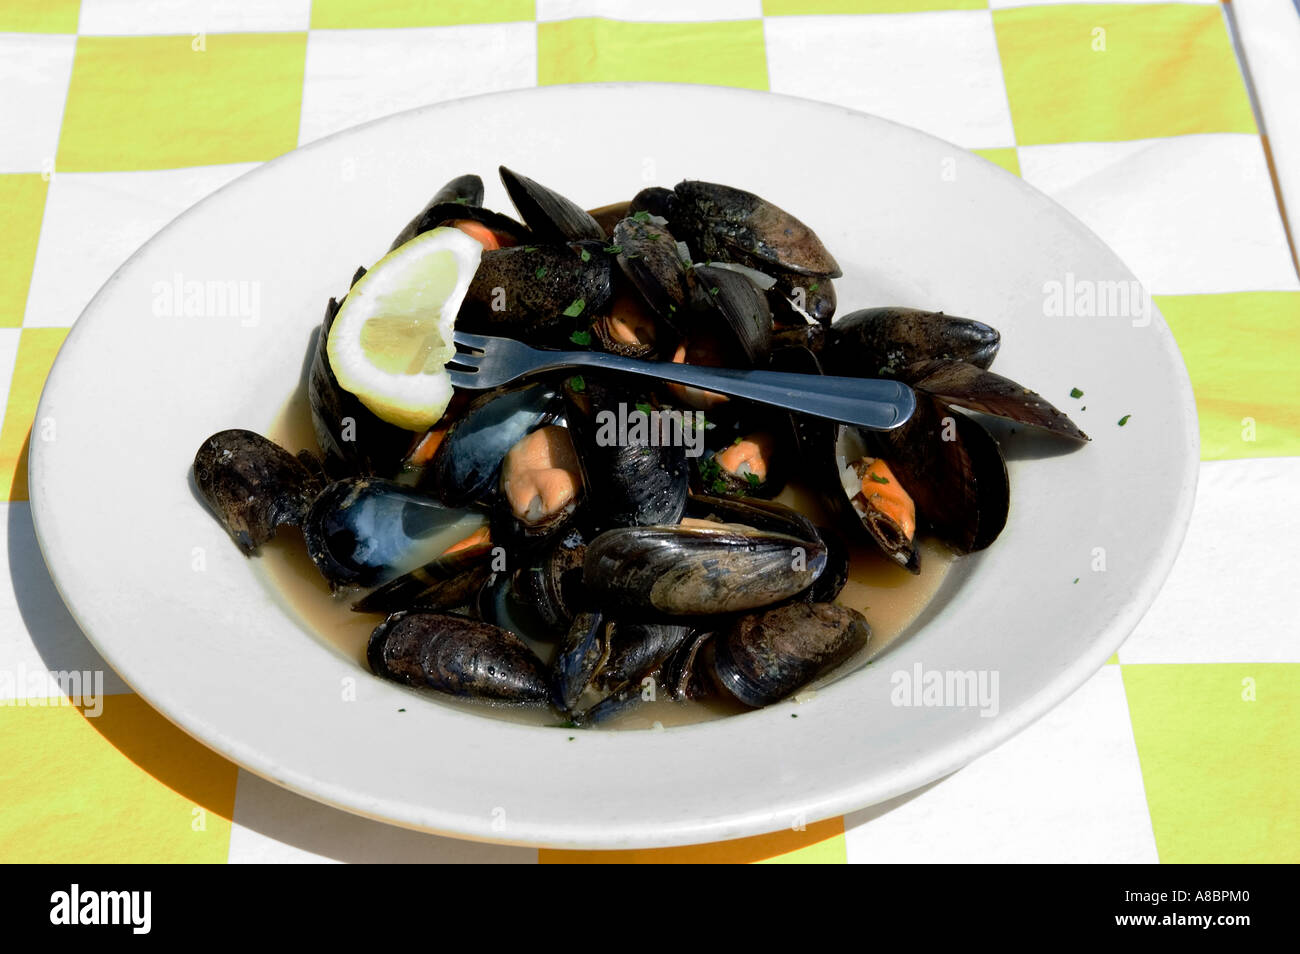 Maryland Annapolis Eating seafood mussels Stock Photo